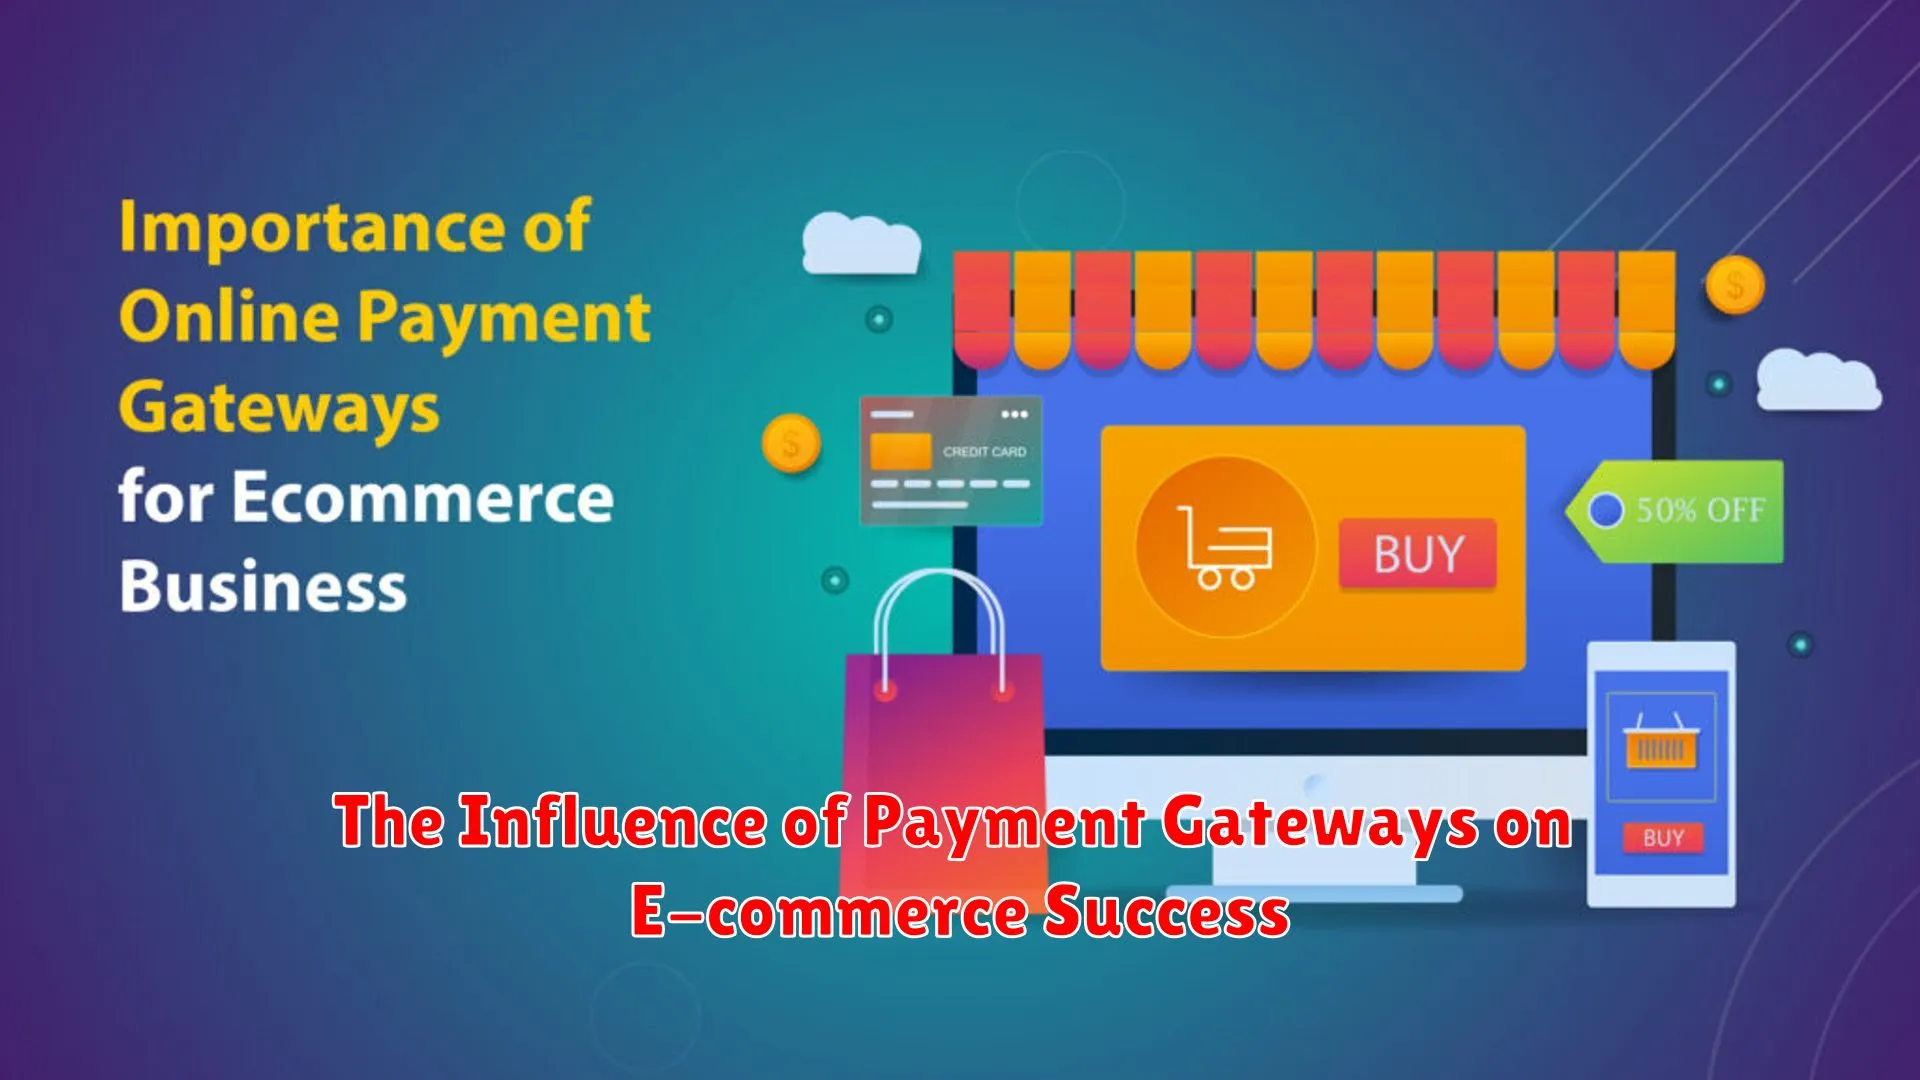 The Influence of Payment Gateways on E-commerce Success